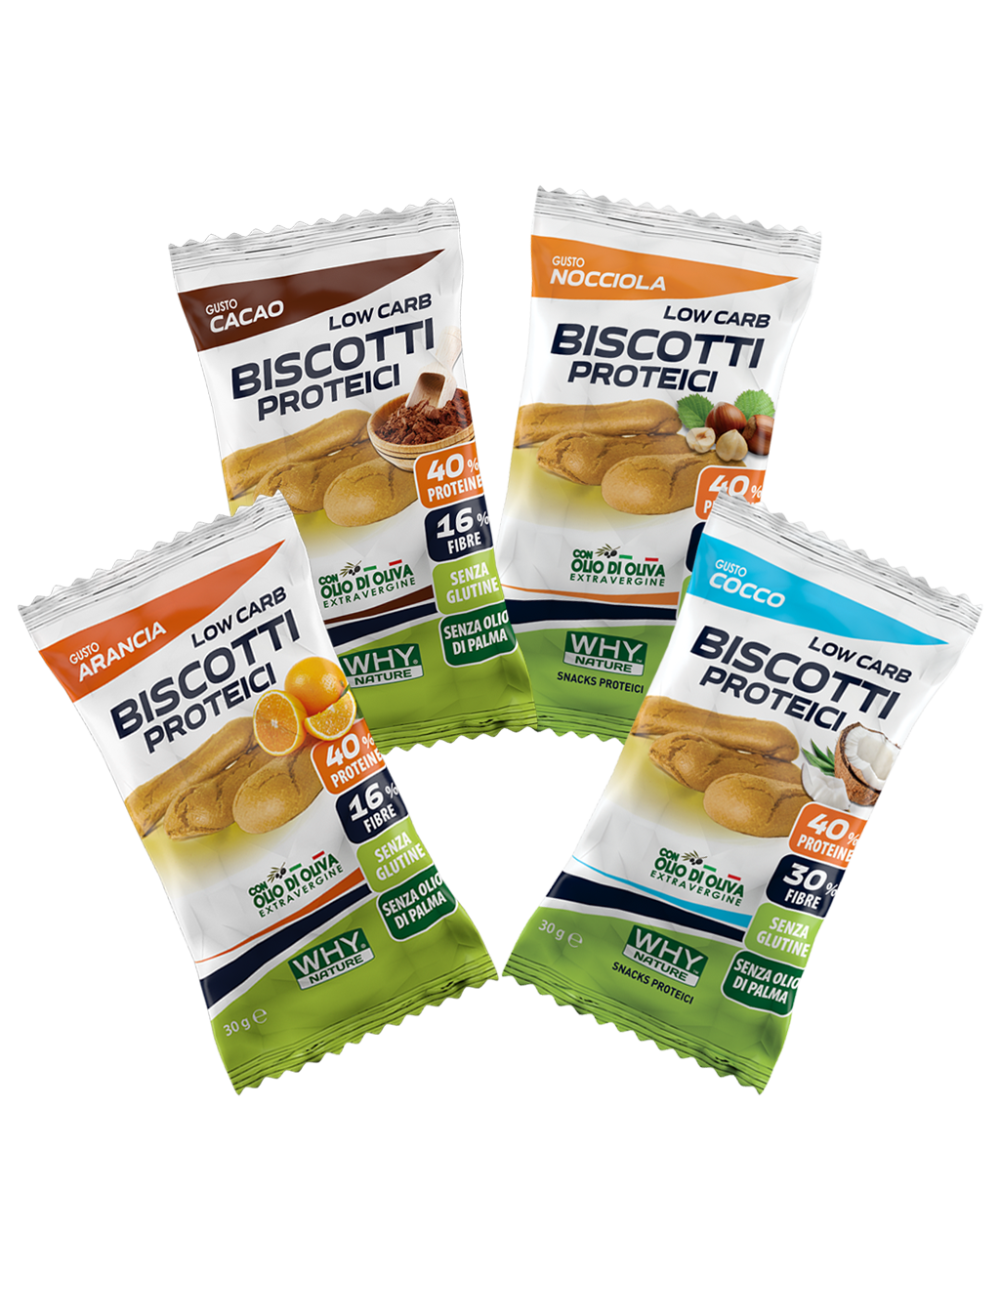 LOW CARB BISCOTTI PROTEICI 30g